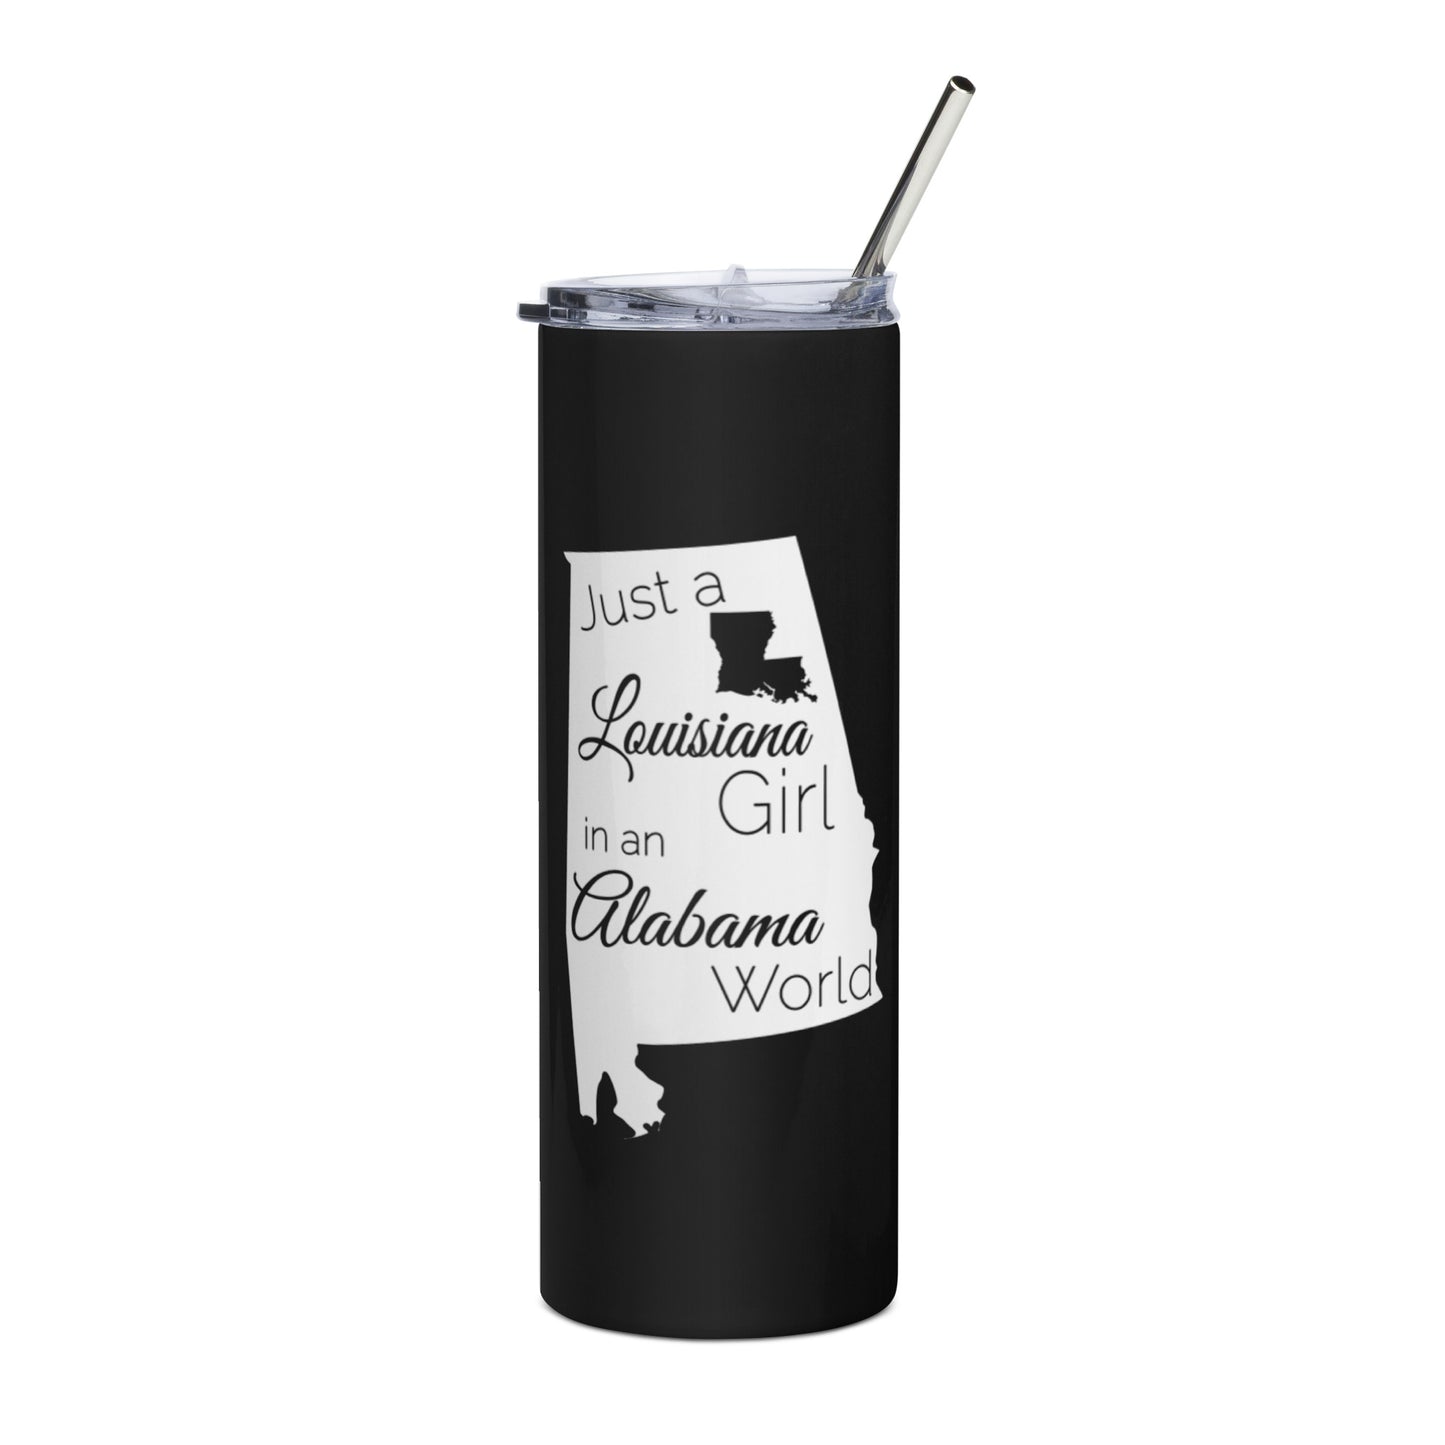 Just a Louisiana Girl in an Alabama World Stainless steel tumbler